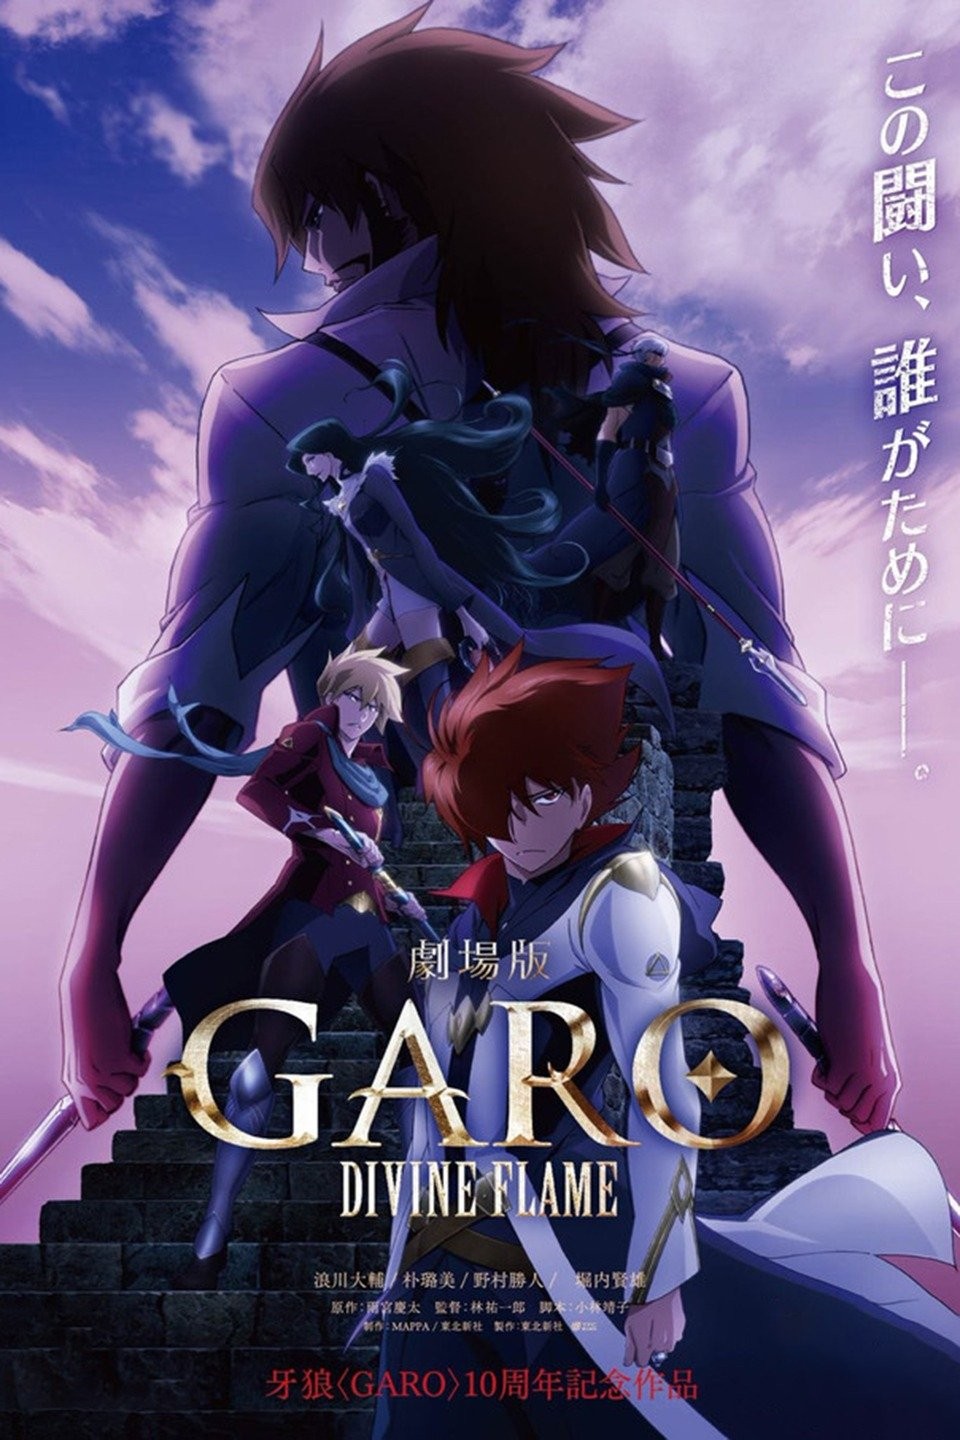 Garo the Animation Episode 1 Seen no Demons – Mage in a Barrel